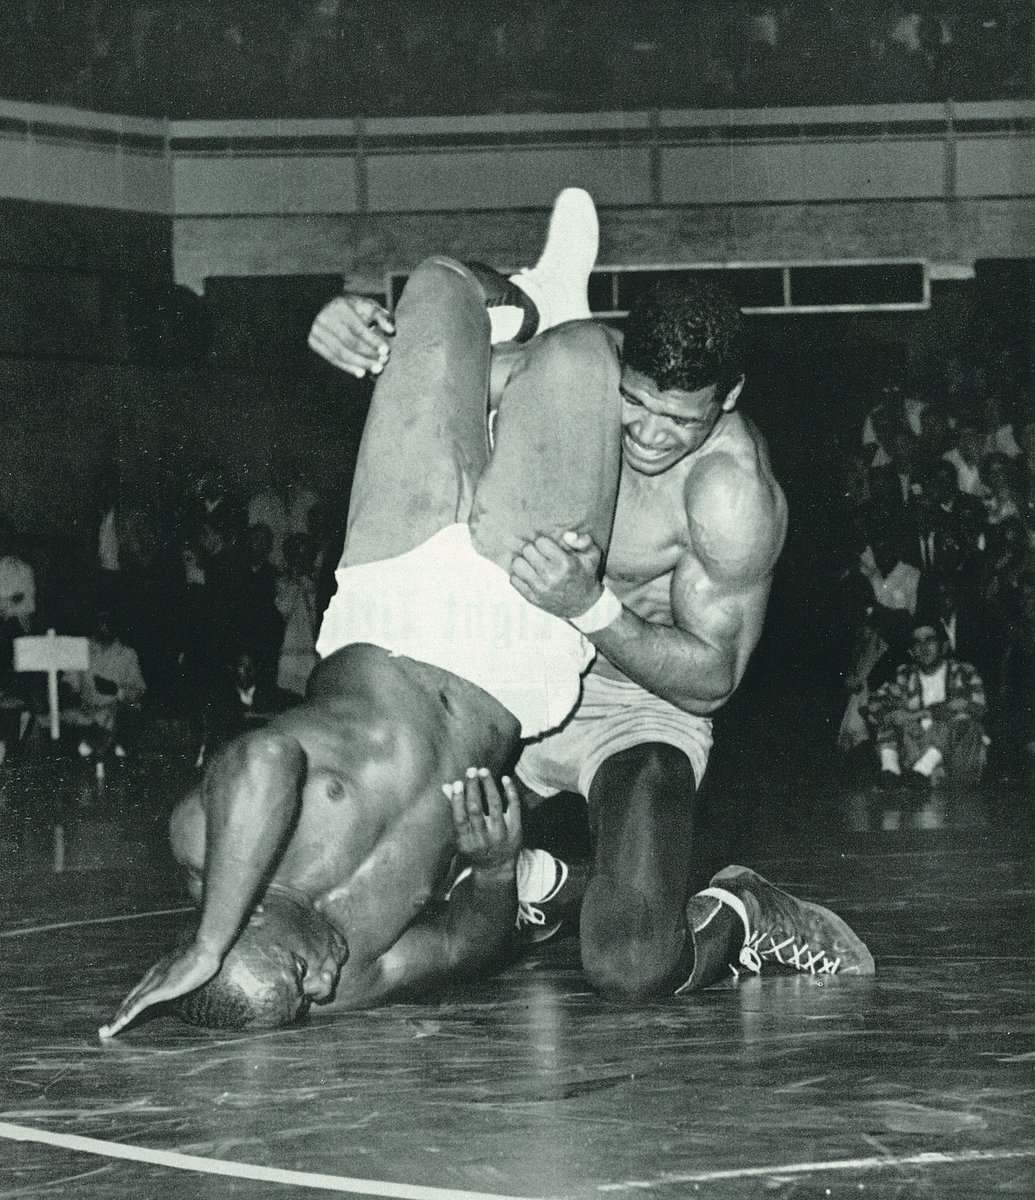 A thread of some black history in OSU wrestling in honor of  #JUNETEENTH2020   Joe James was the first black  #okstate wrestler and first black Big 8 Champion. He also became just the second black wrestler ever to win an NCAA title in 1964.